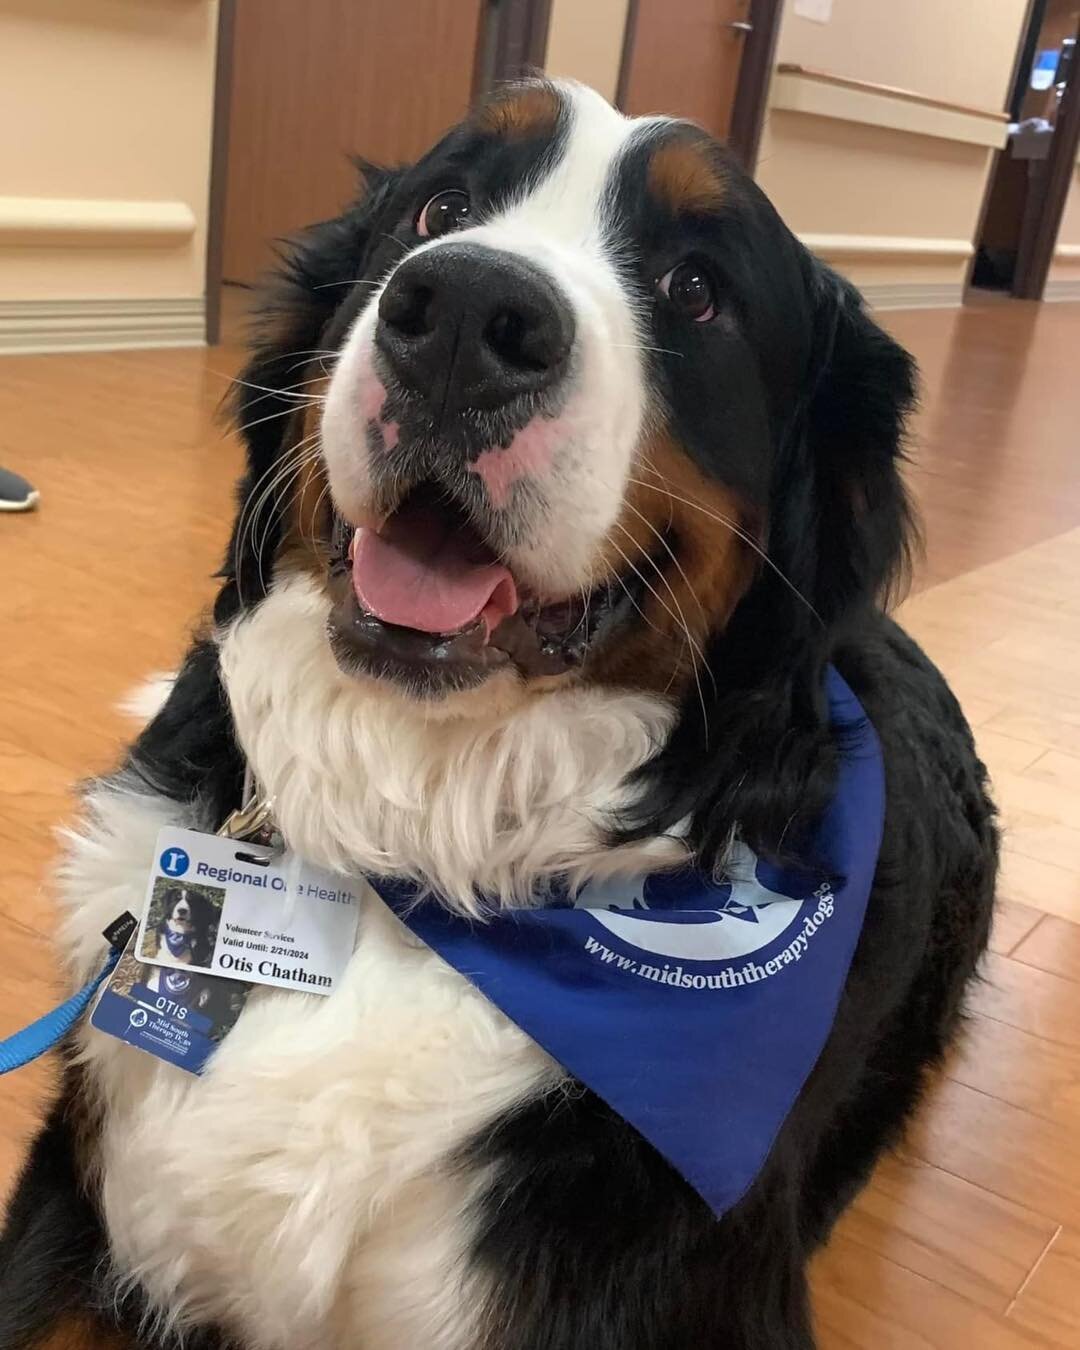 Regional One &hellip; Patients at our Inpatient Rehabilitation Hospital got a visit today from Otis from Mid South Therapy Dogs. Therapy animals help lift patients&rsquo; spirits, provide encouragement, and offer a break from the medical care routine